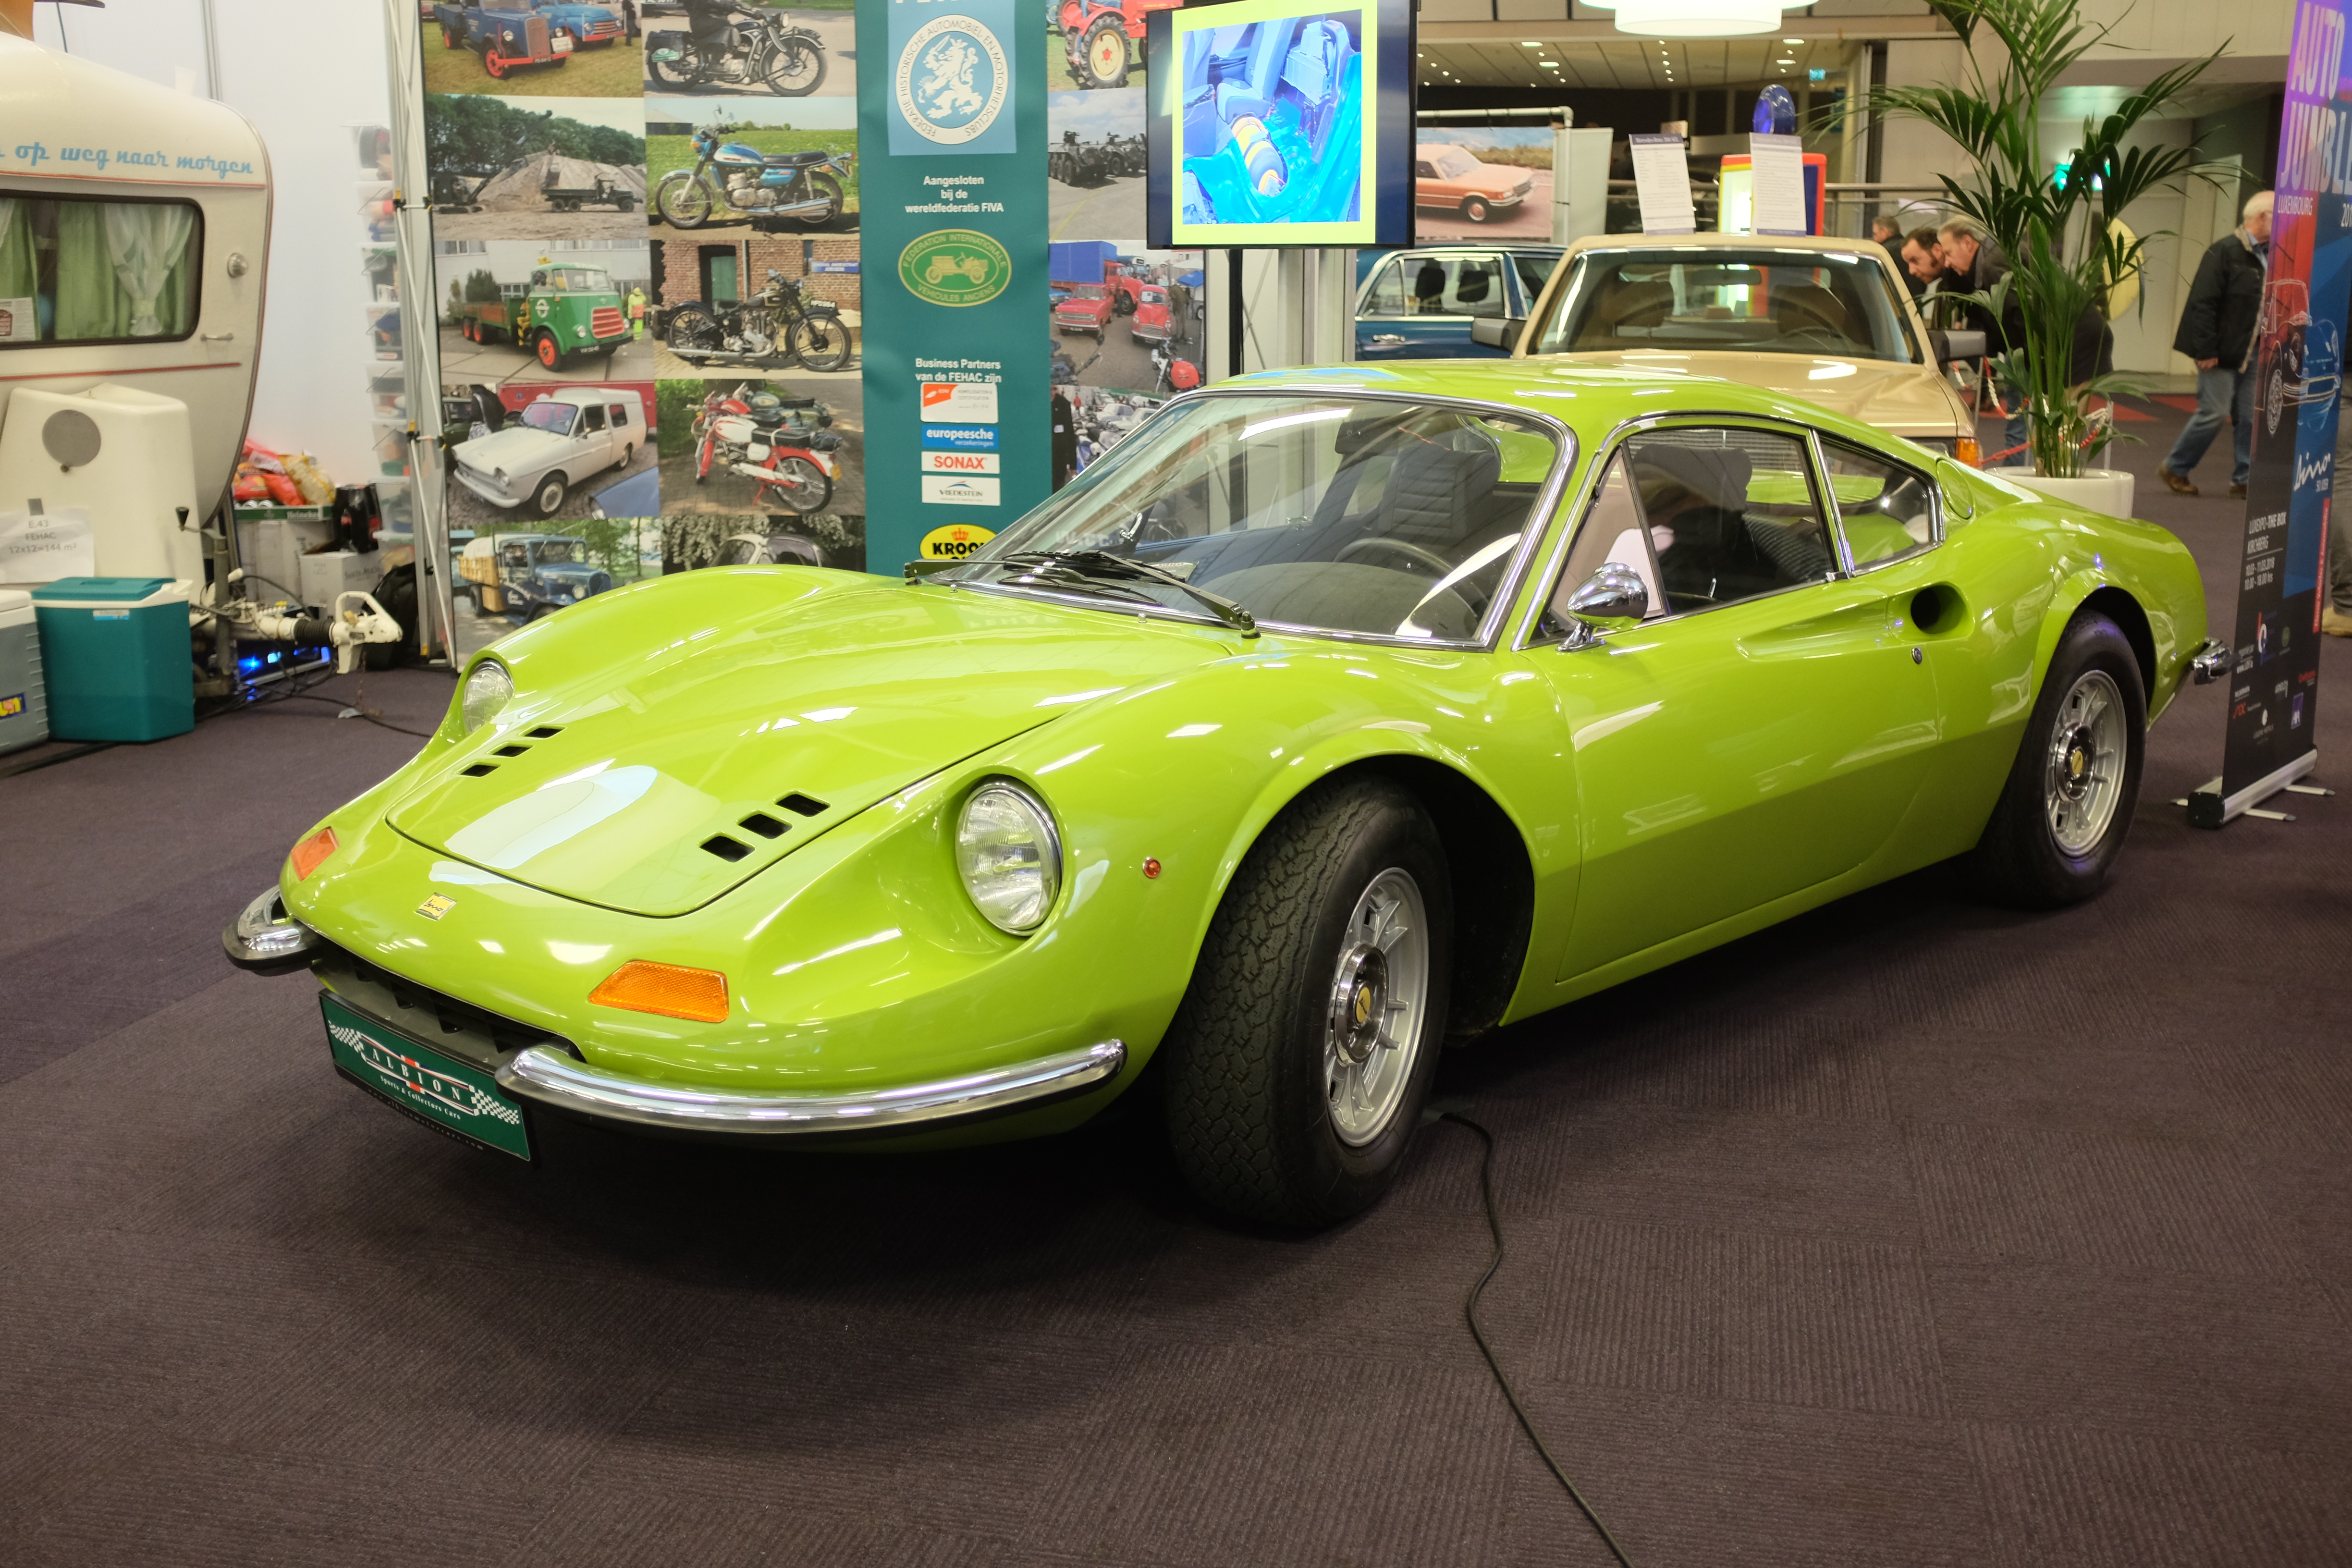 InterClassics Maastricht celebrates its 25th birthday with its best show yet